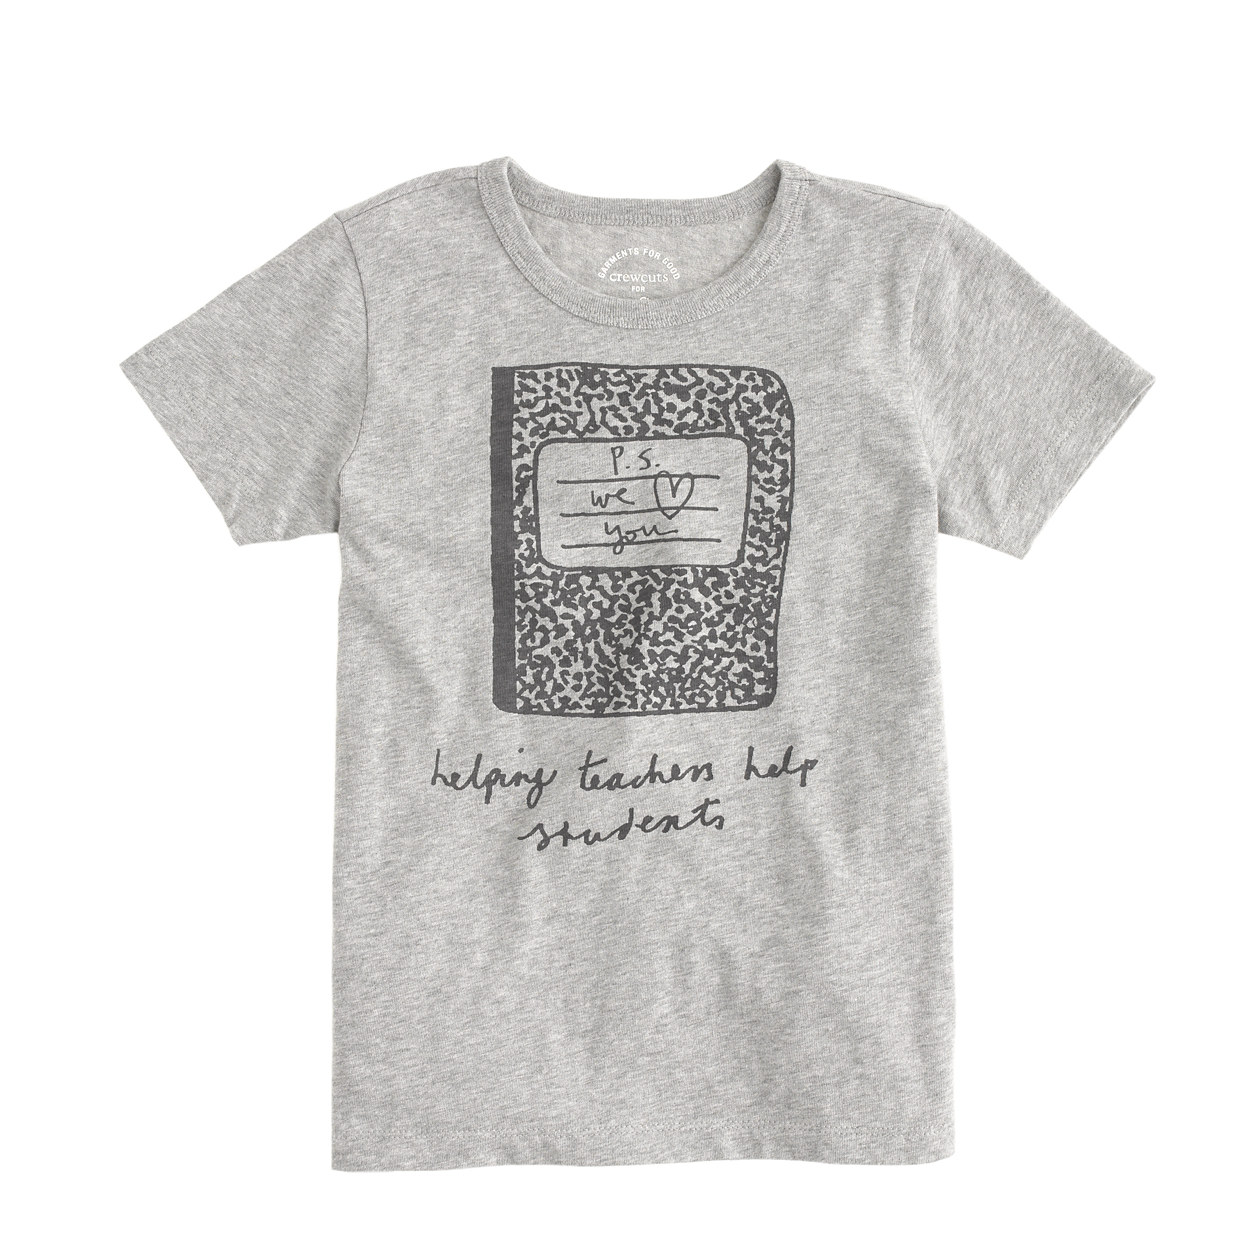 J.Crew for Donorschoose.org tee